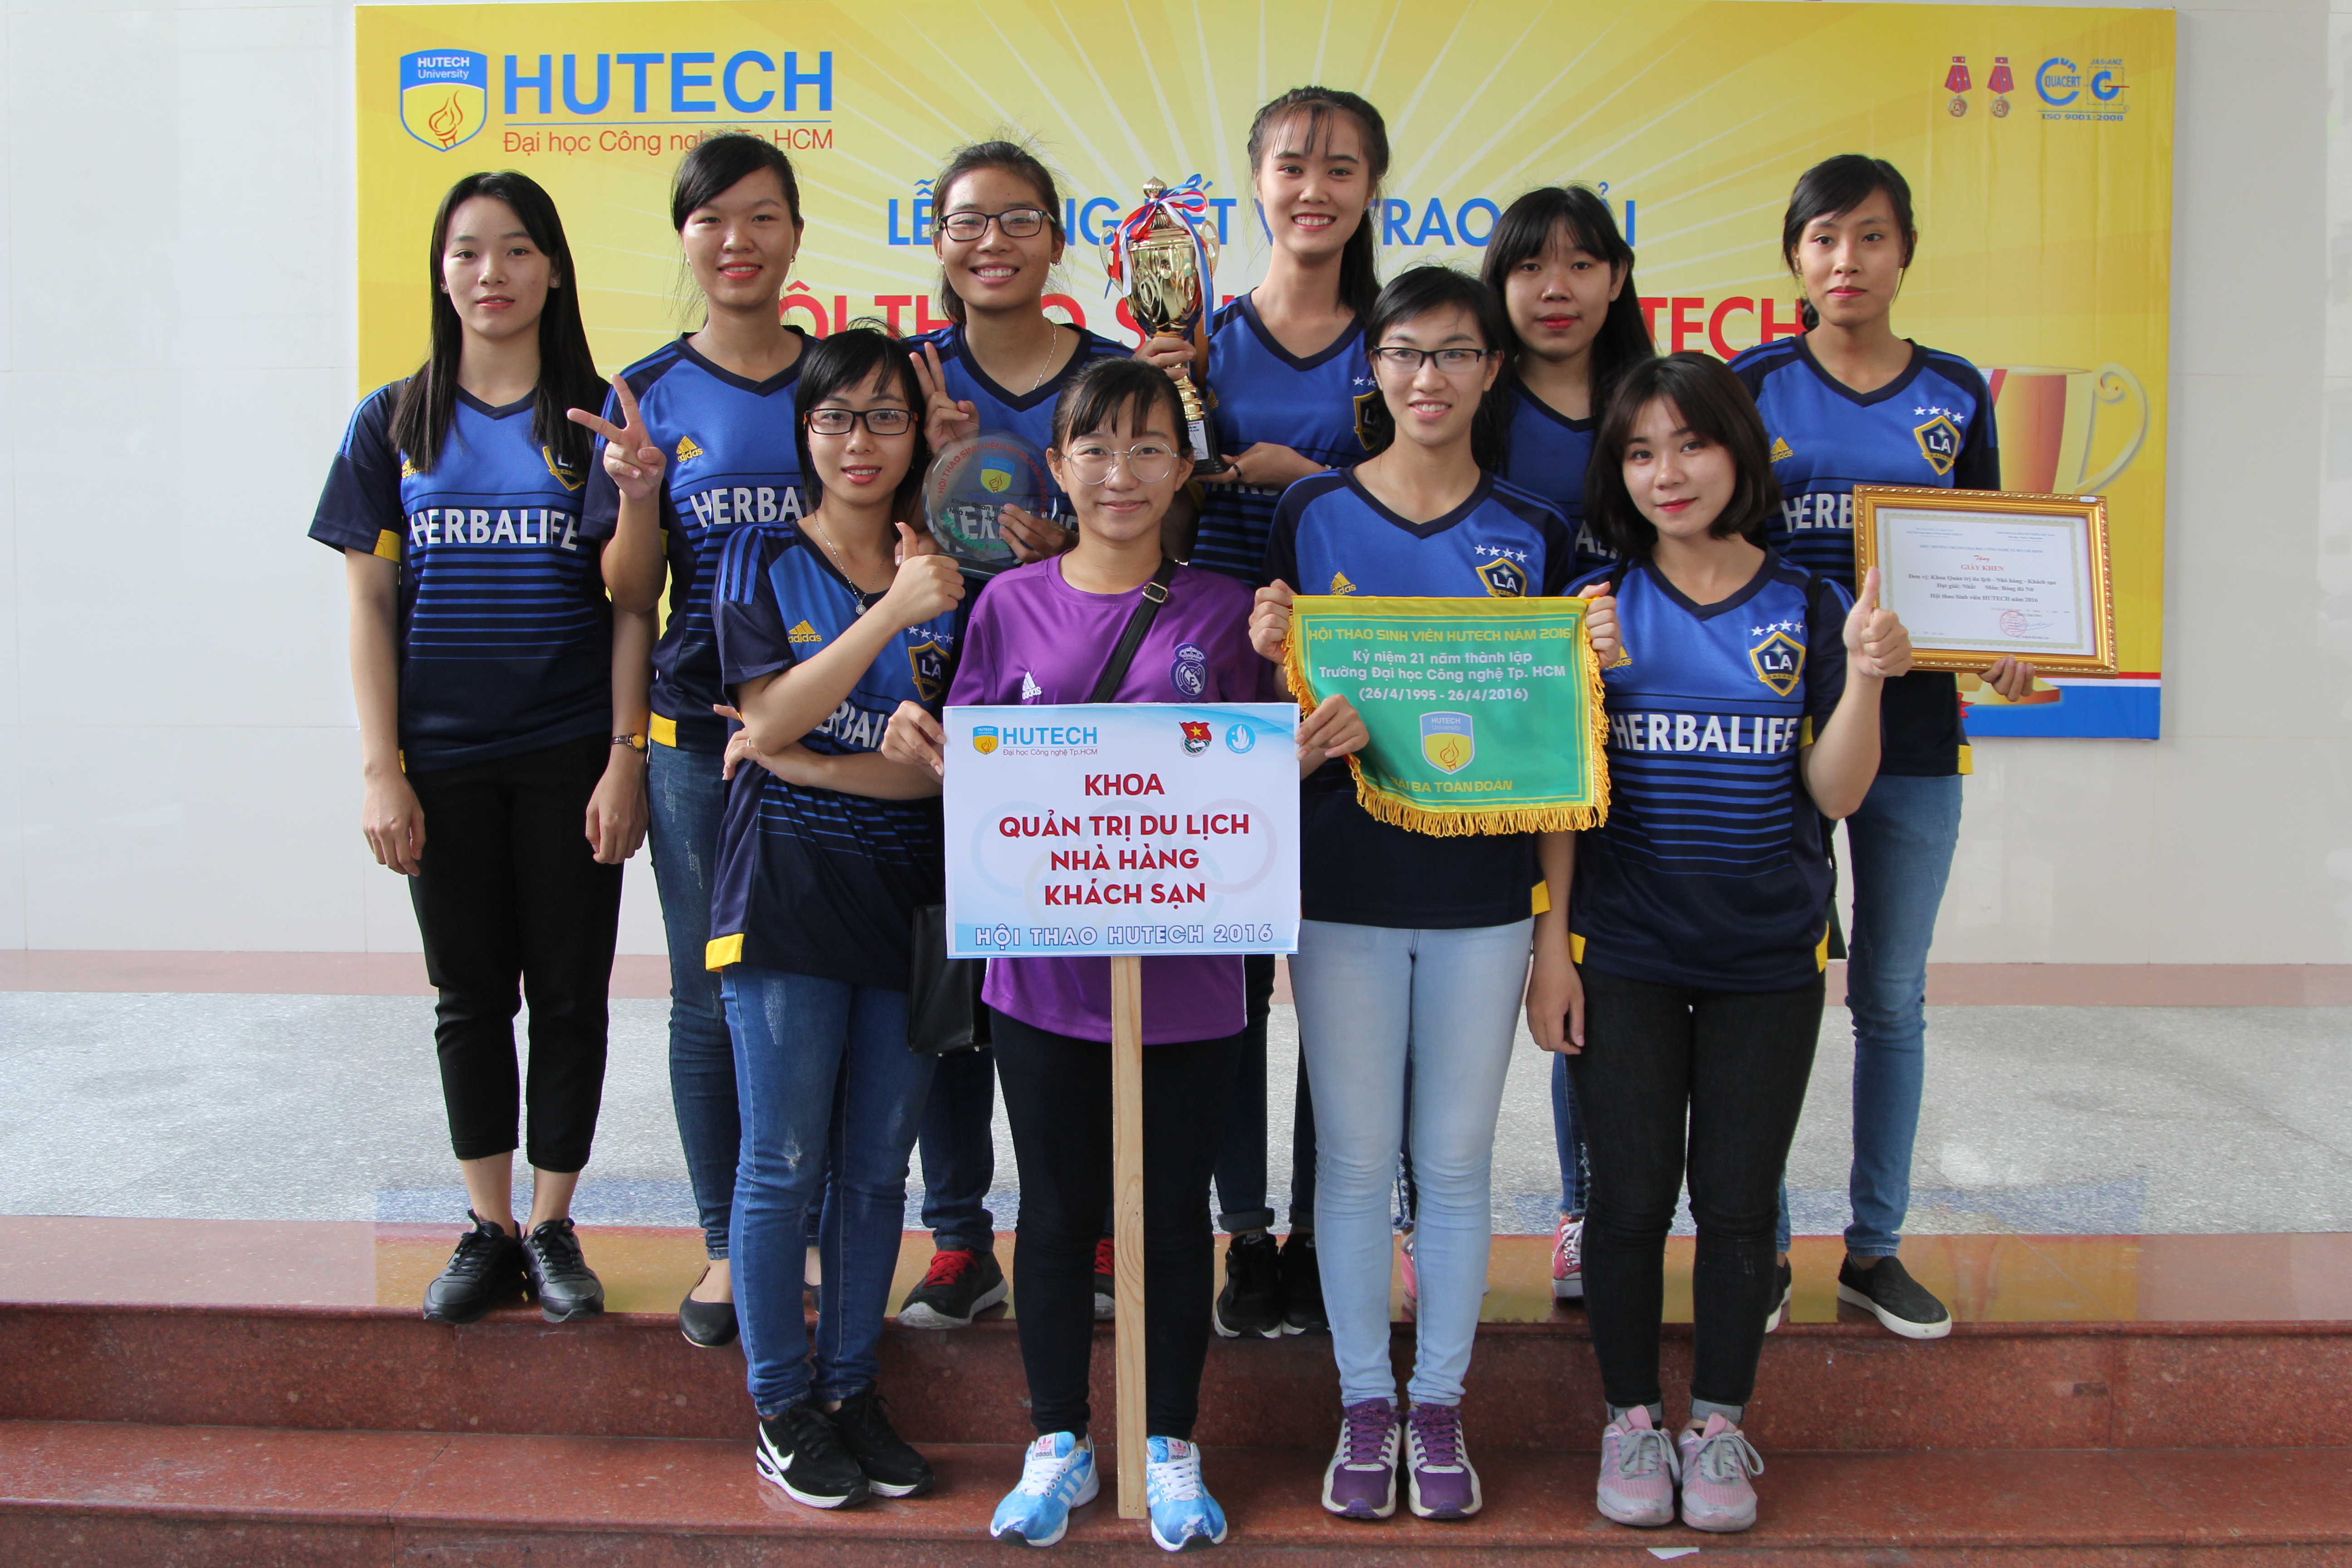 The Faculty of Accounting, Finance and Banking finishes first overall in the 2016 HUTECH Student Sports Fest 62